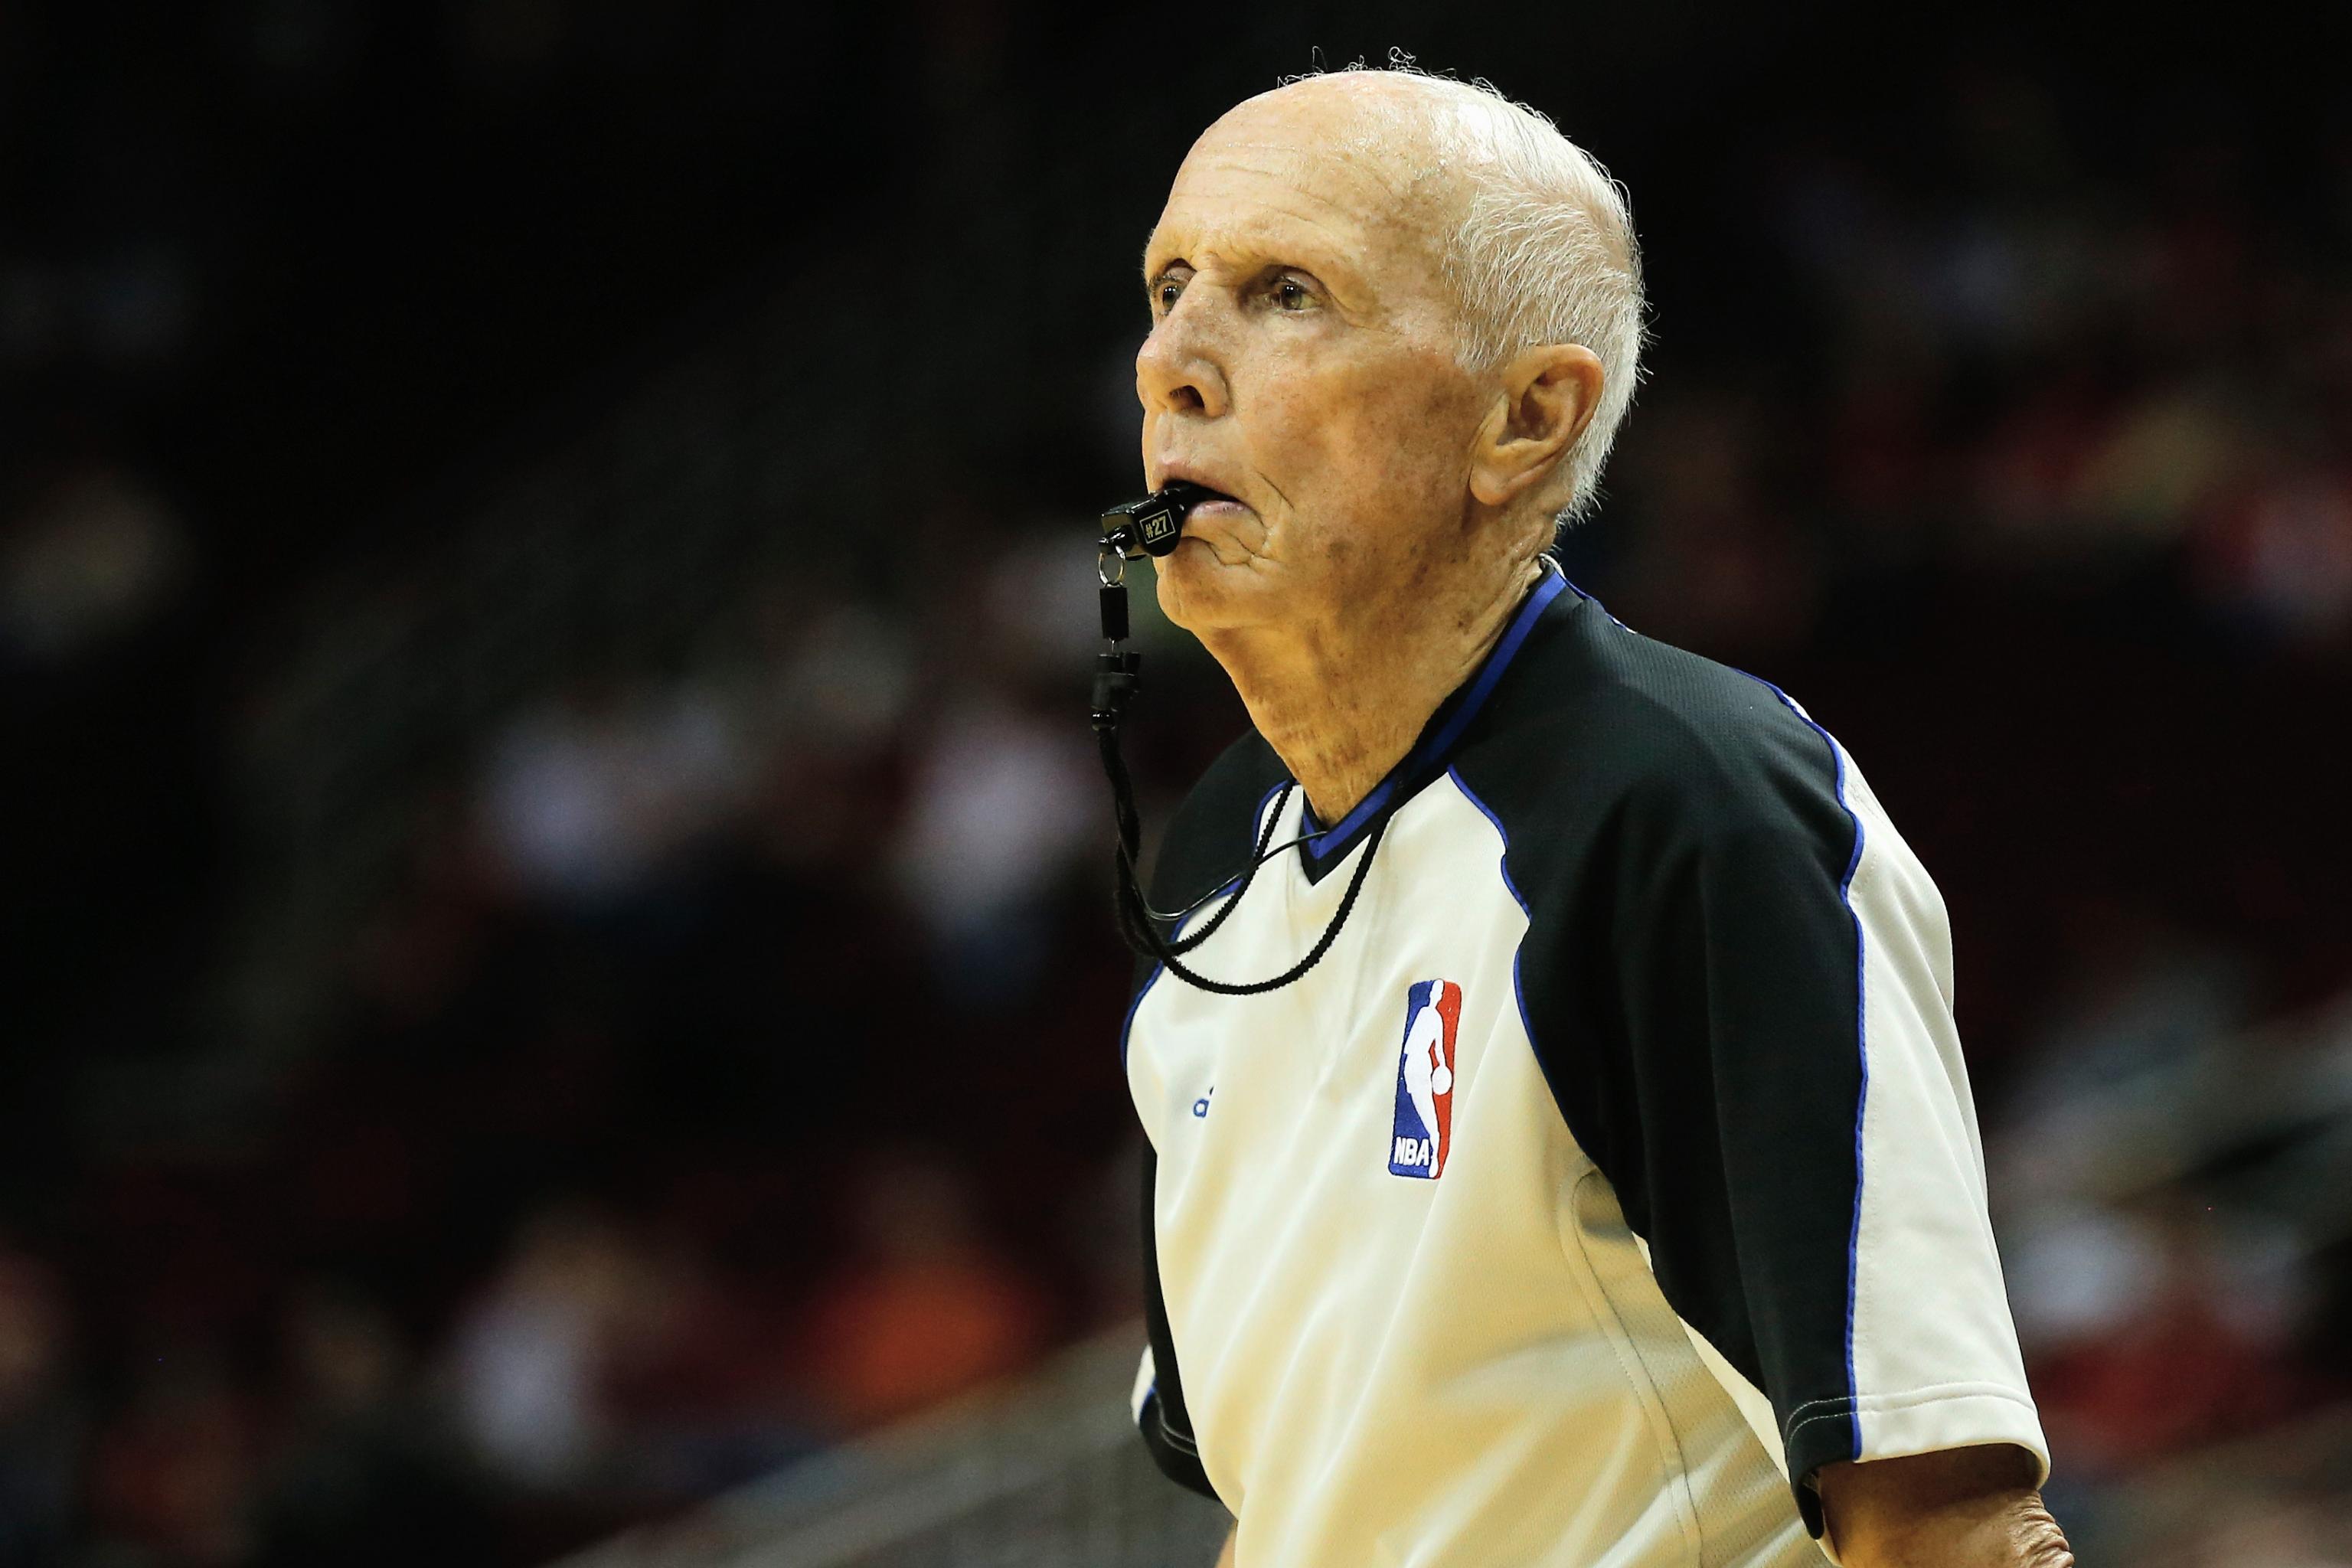 Dick Bavetta, N.B.A. Referee for 39 Years, Is Retiring - The New York Times